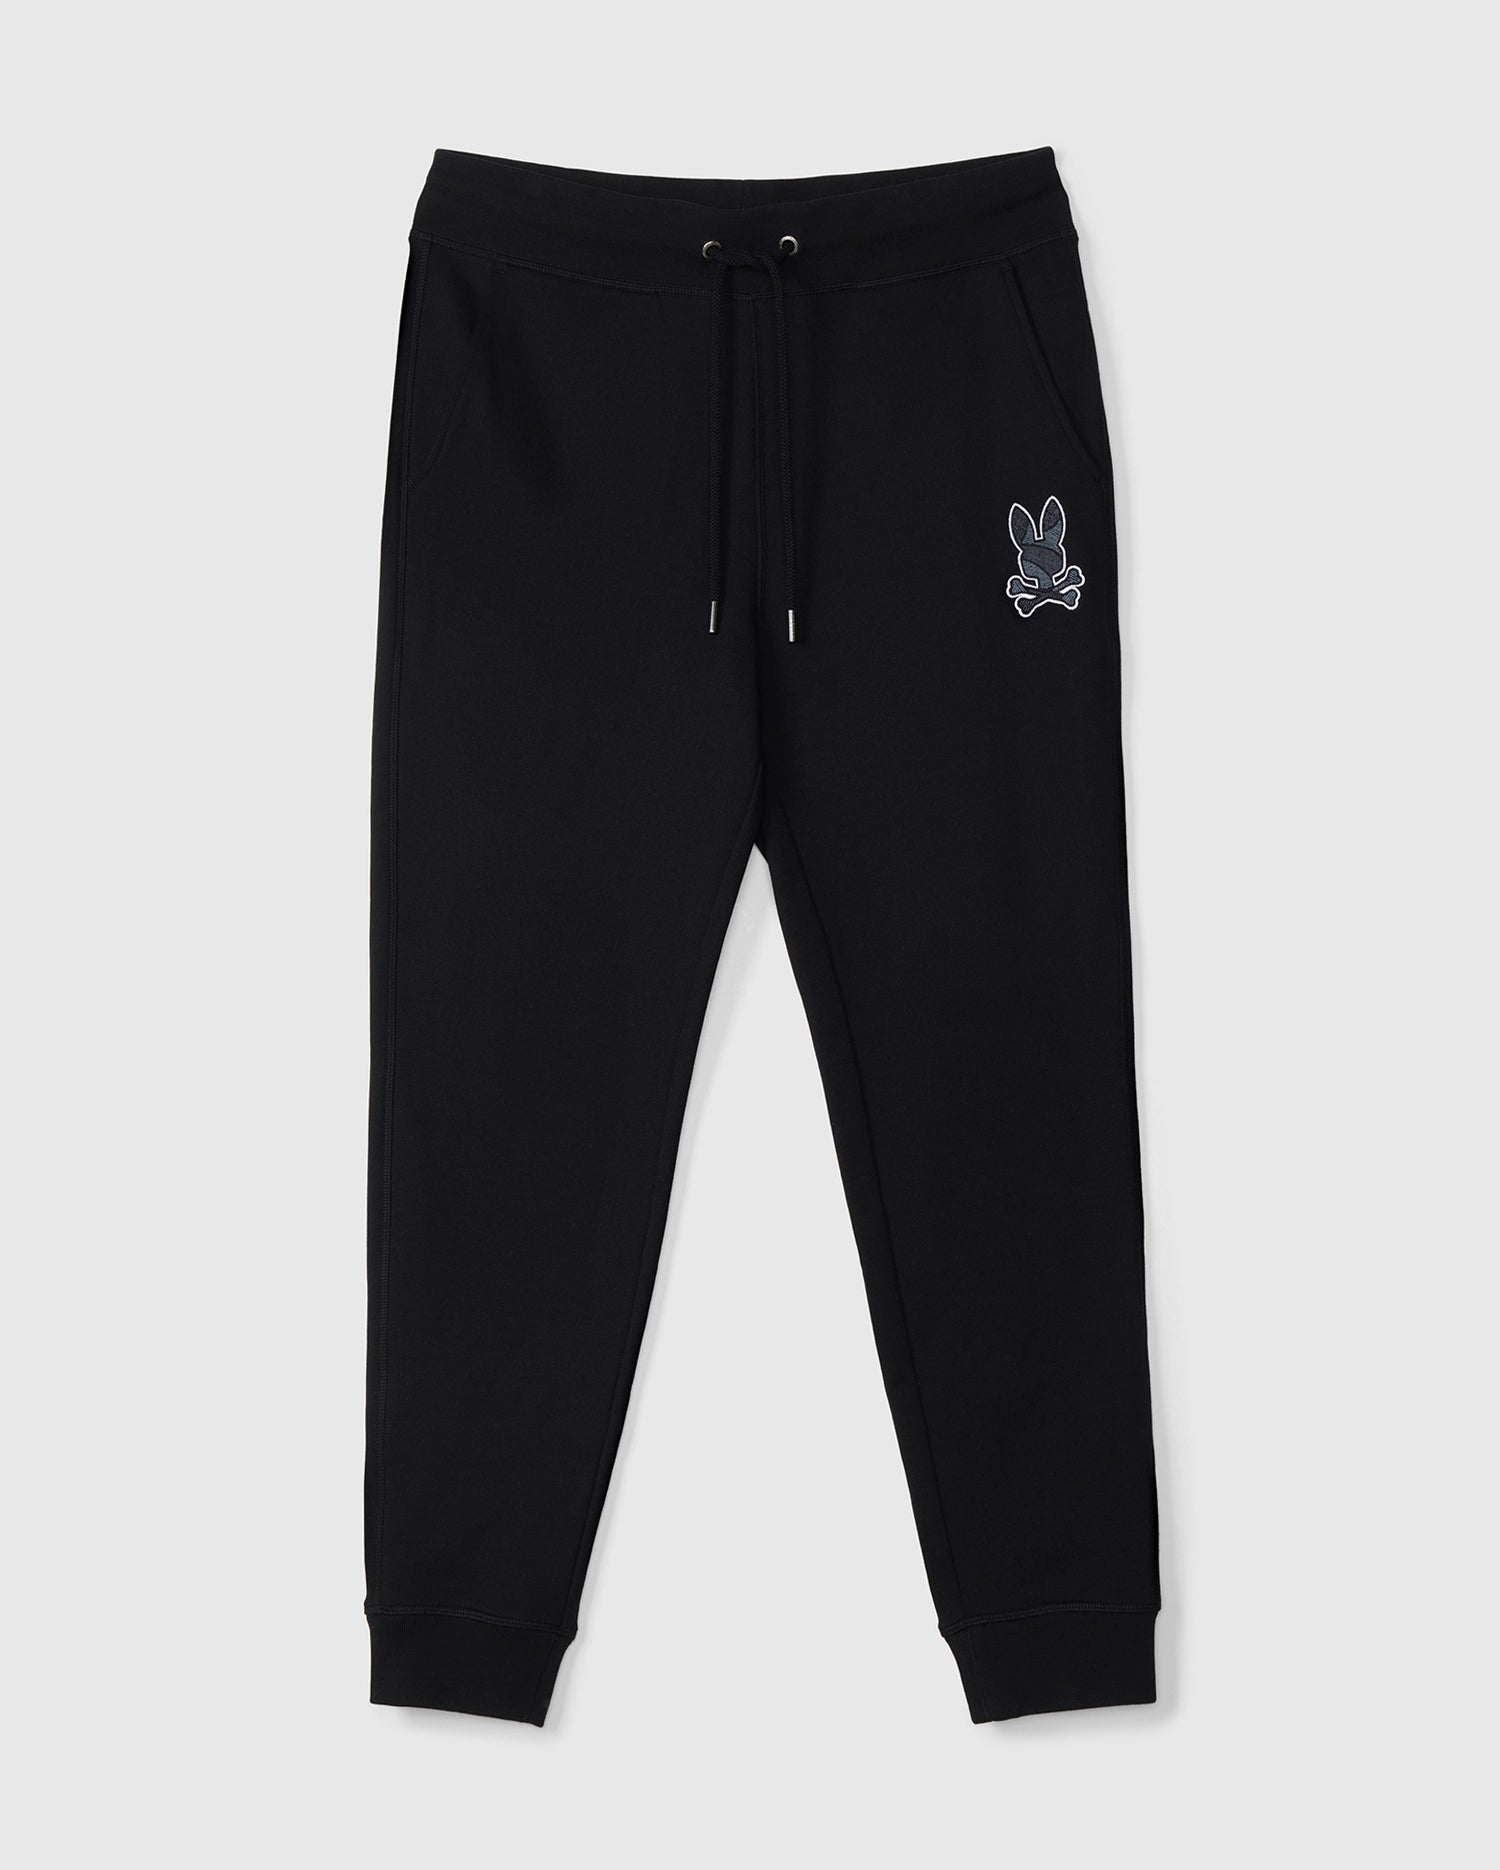 Quality black sweatpants outfit men in Fashionable Variants